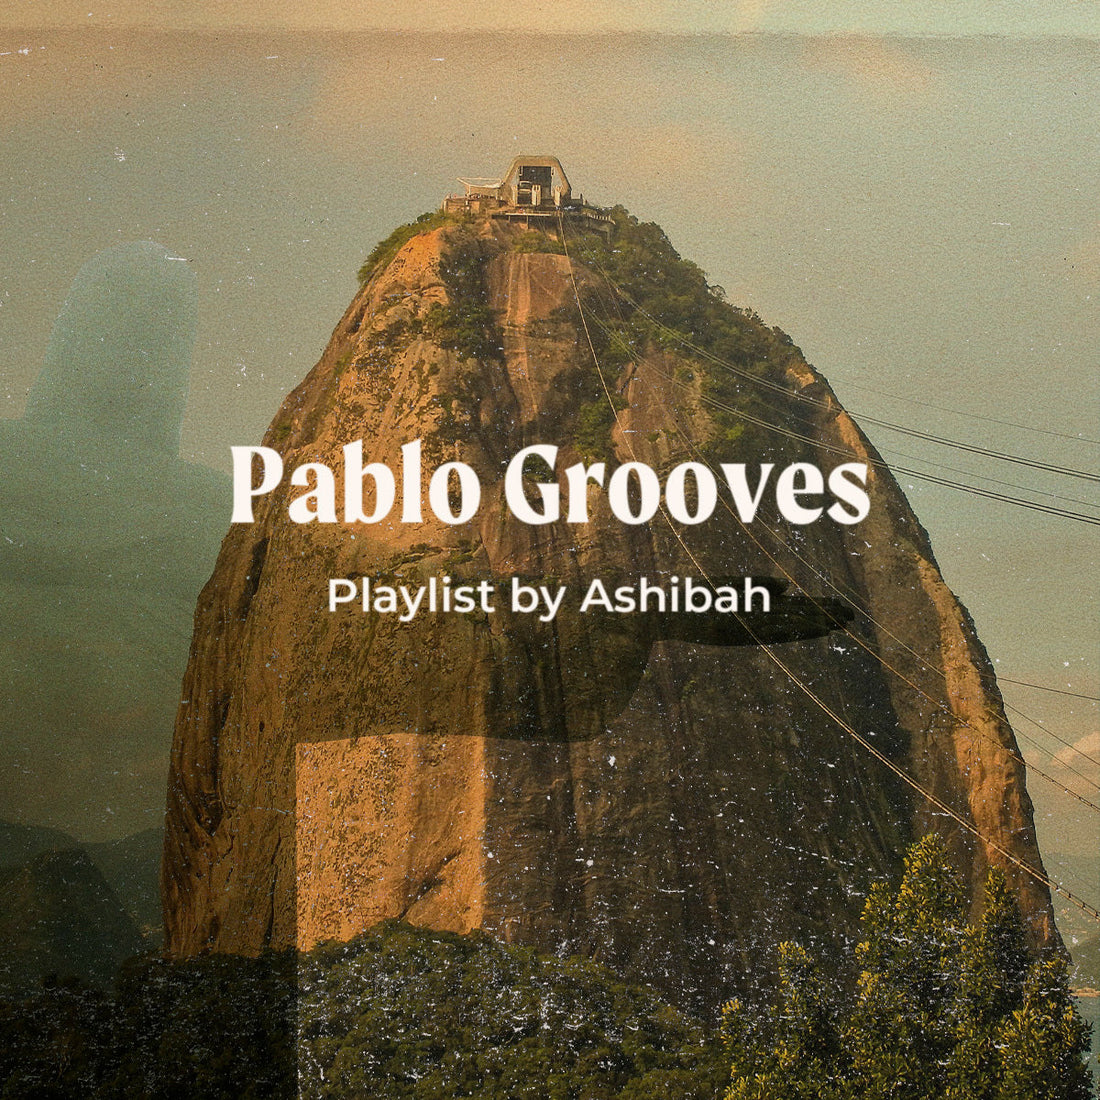 Pablo Grooves